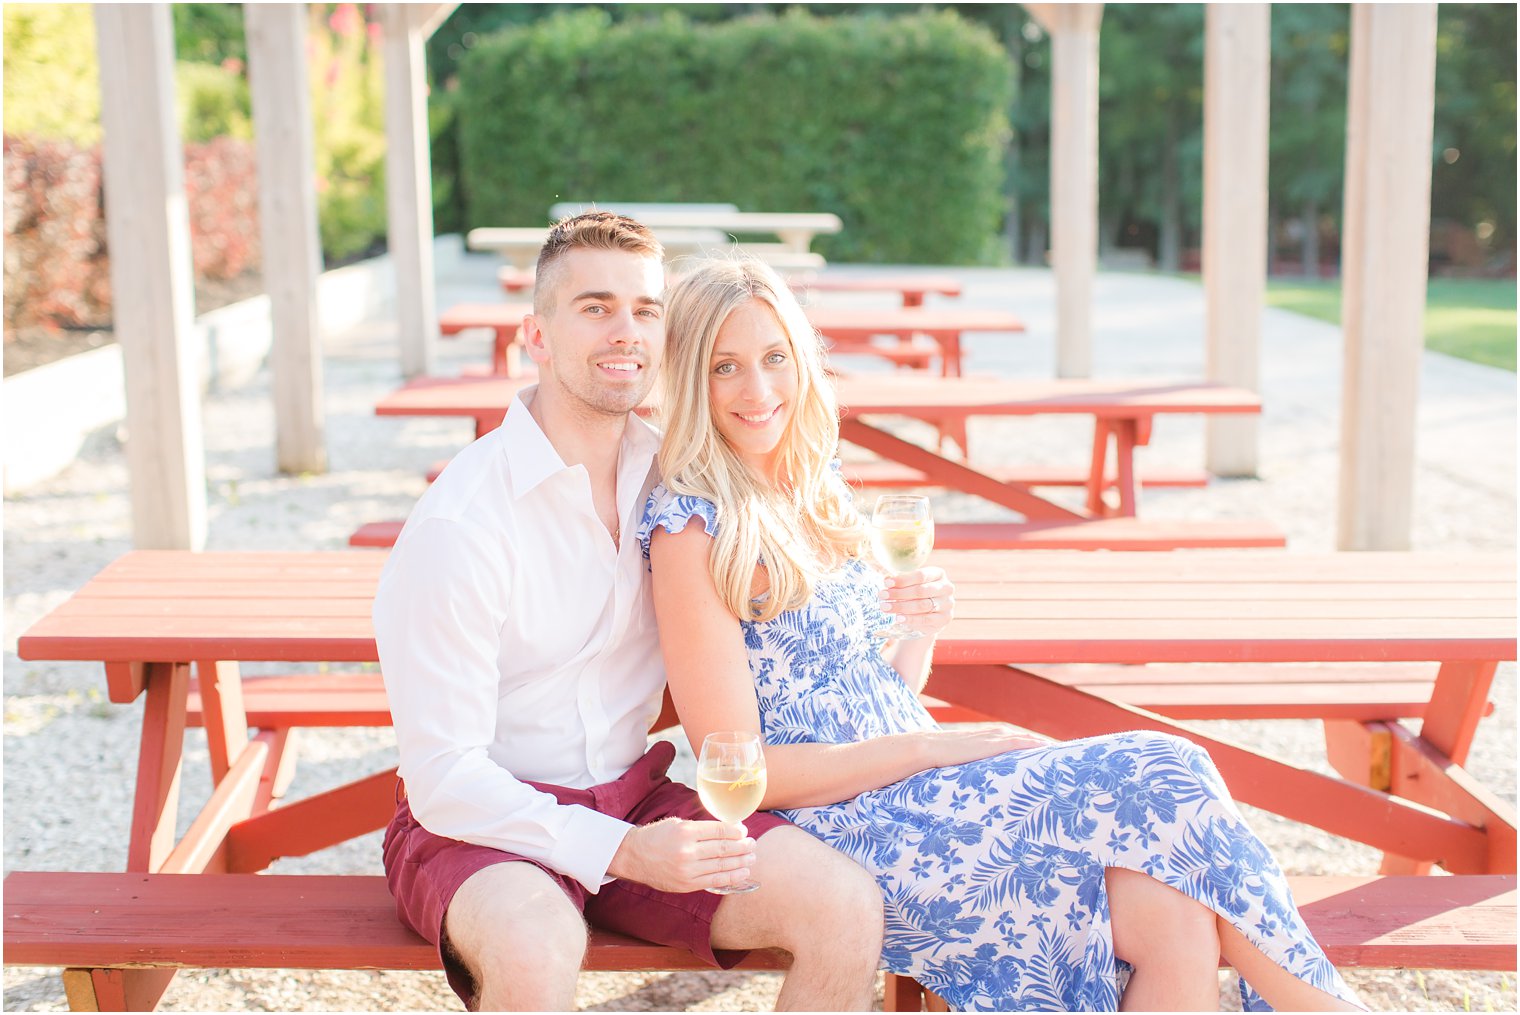 winery themed engagement session at Laurita Winery photographed by Idalia Photography